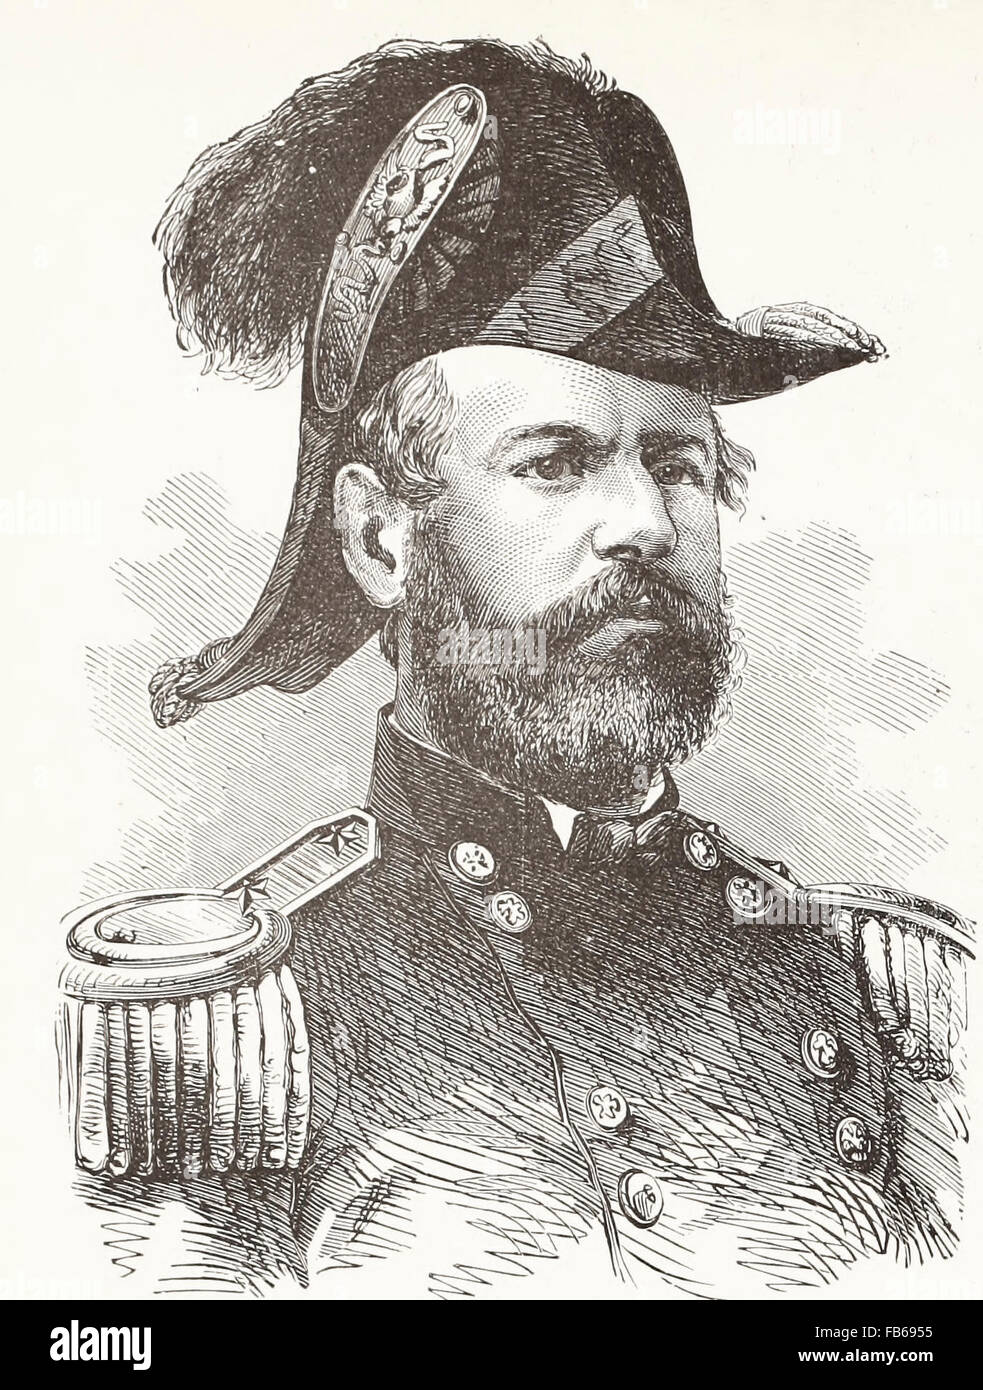 General Fitzjohn Porter - Fitz John Porter was a career United States Army officer and a Union General during the American Civil War. He is most known for his performance at the Second Battle of Bull Run and his subsequent court martial. Stock Photo